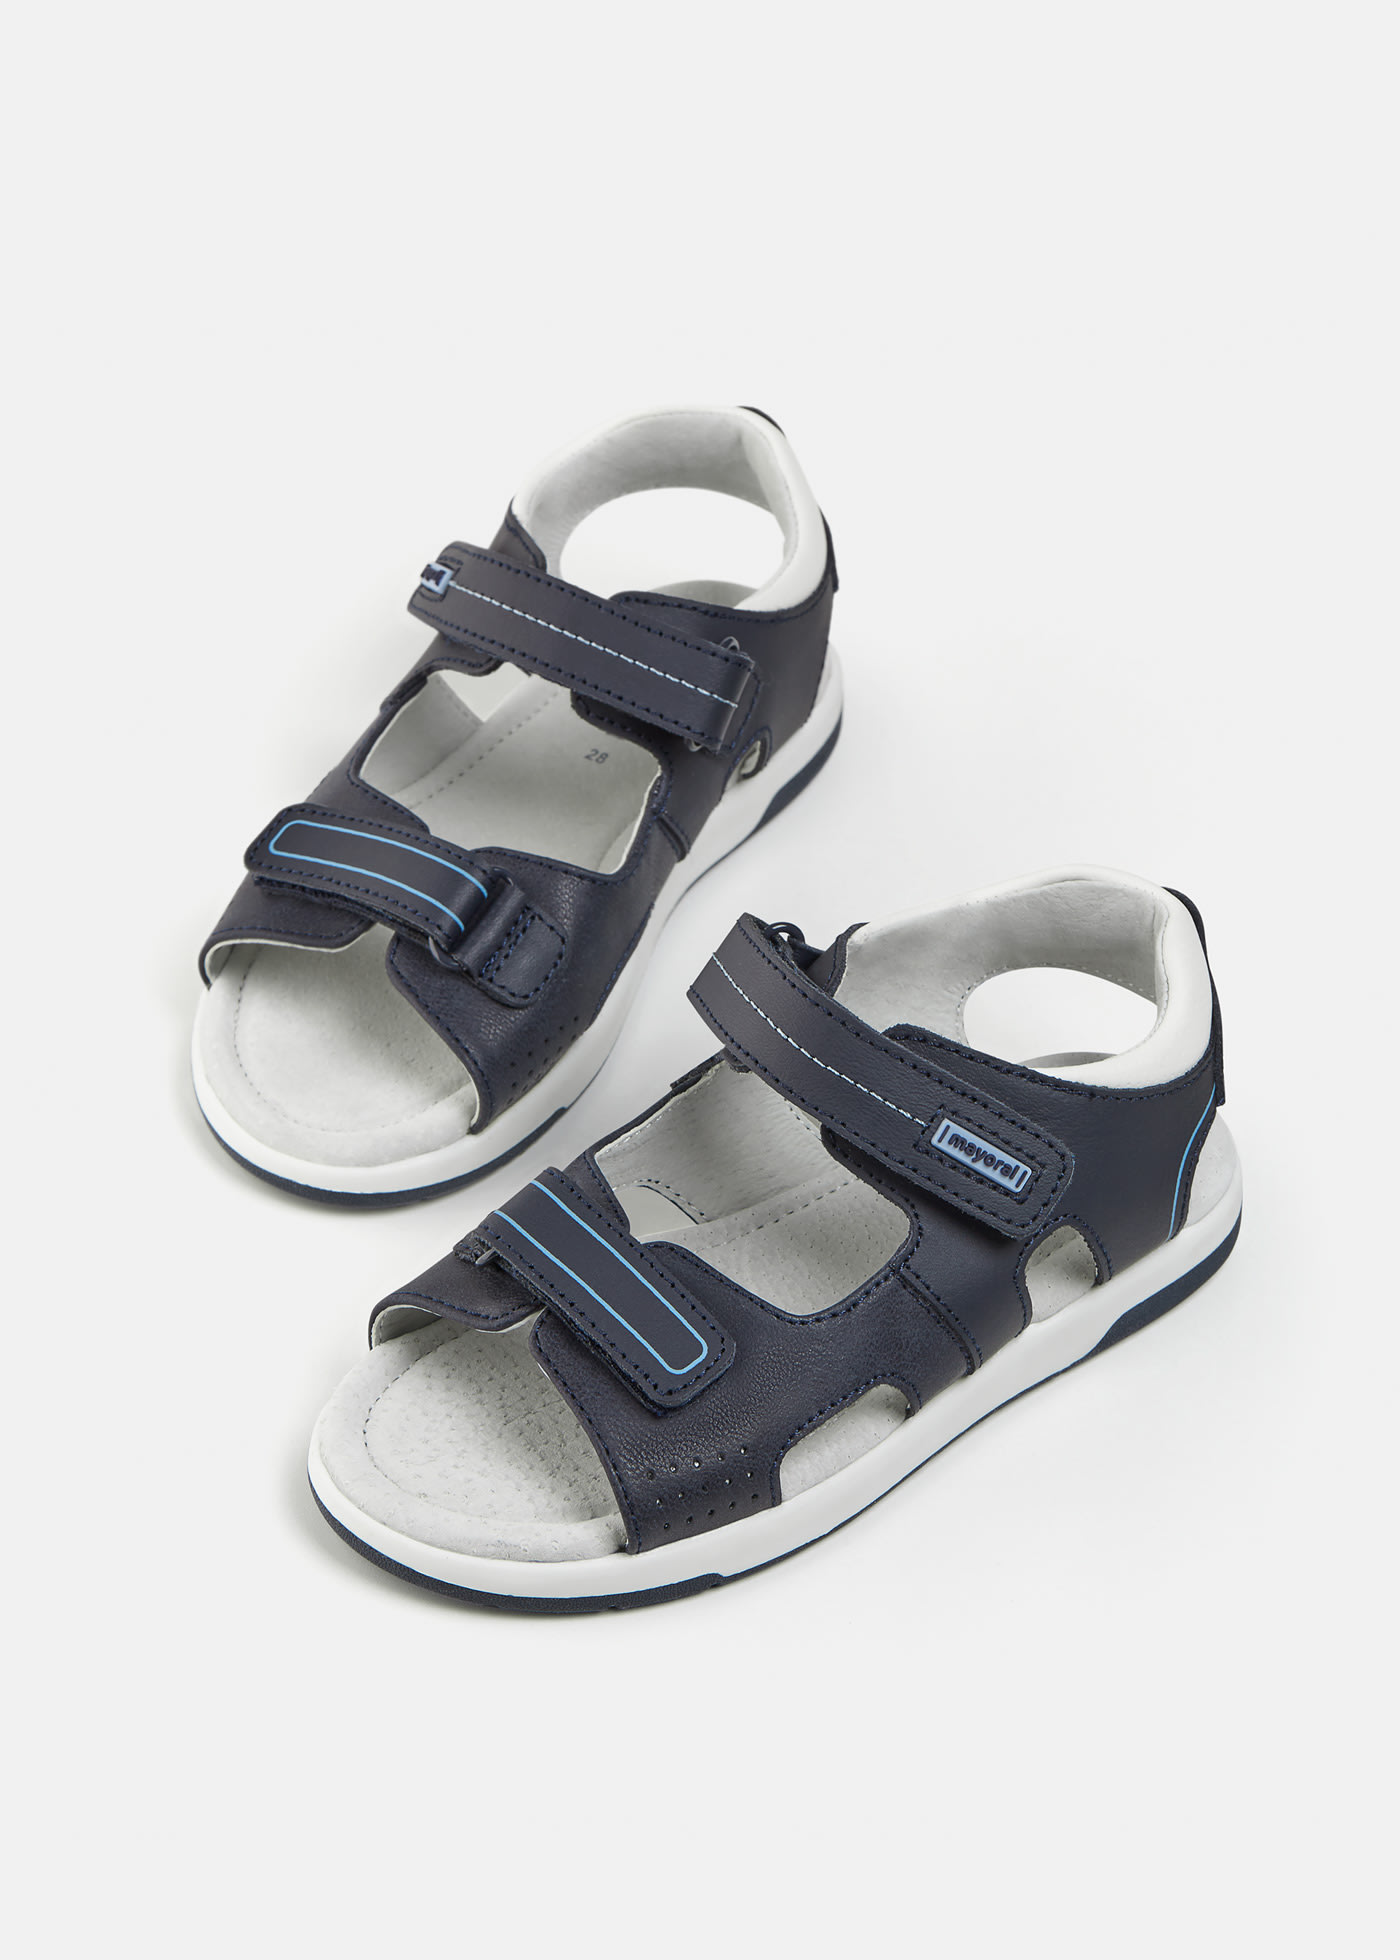 Sandals with double velcro boy